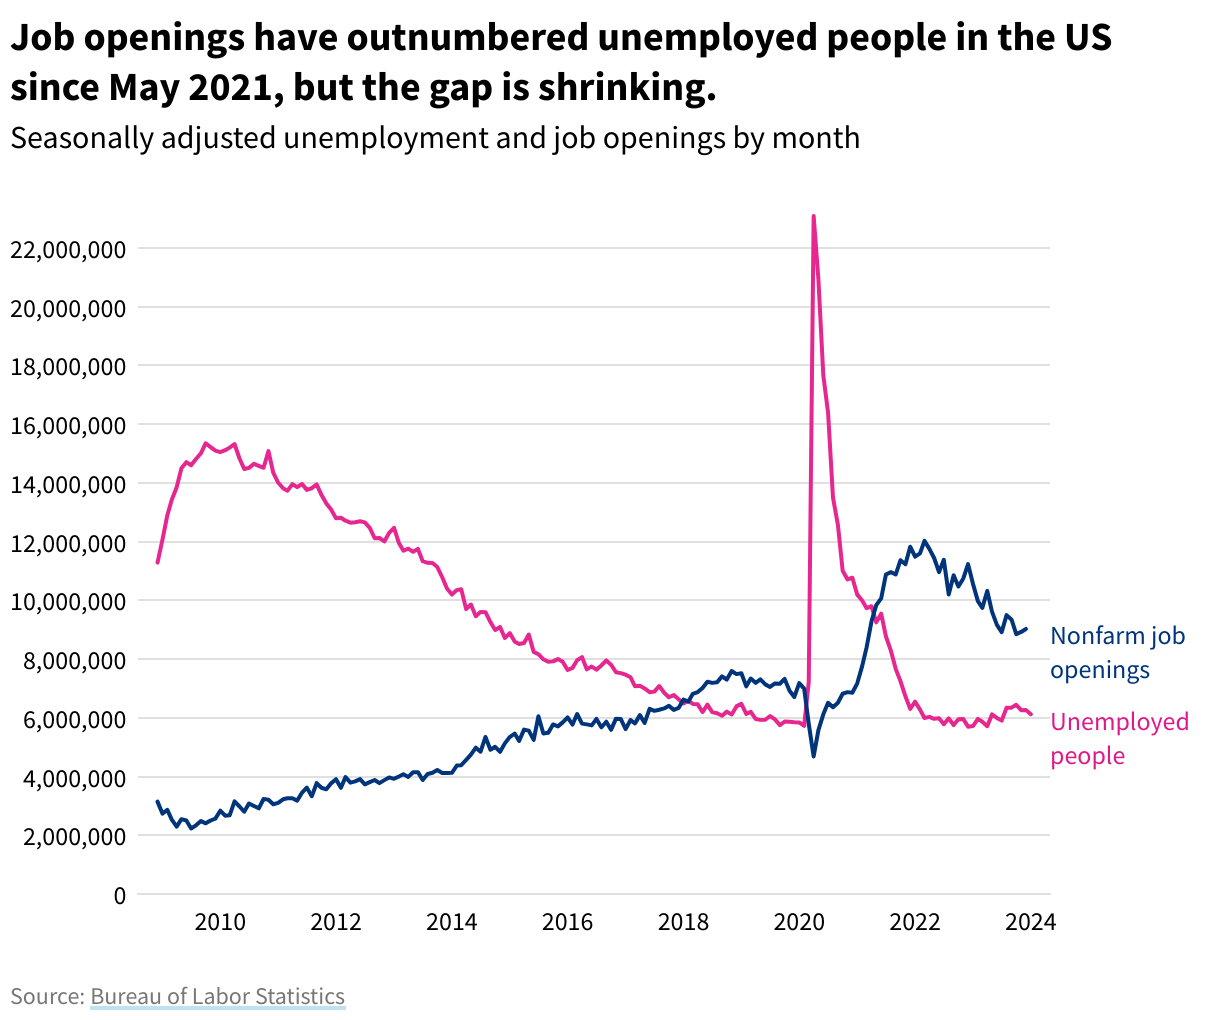 A line chart showing seasonally-adjusted nonfarm job openings and total unemployment since November 2008. Job openings have outnumbered unemployed people since May 2021, but the gap is shrinking.